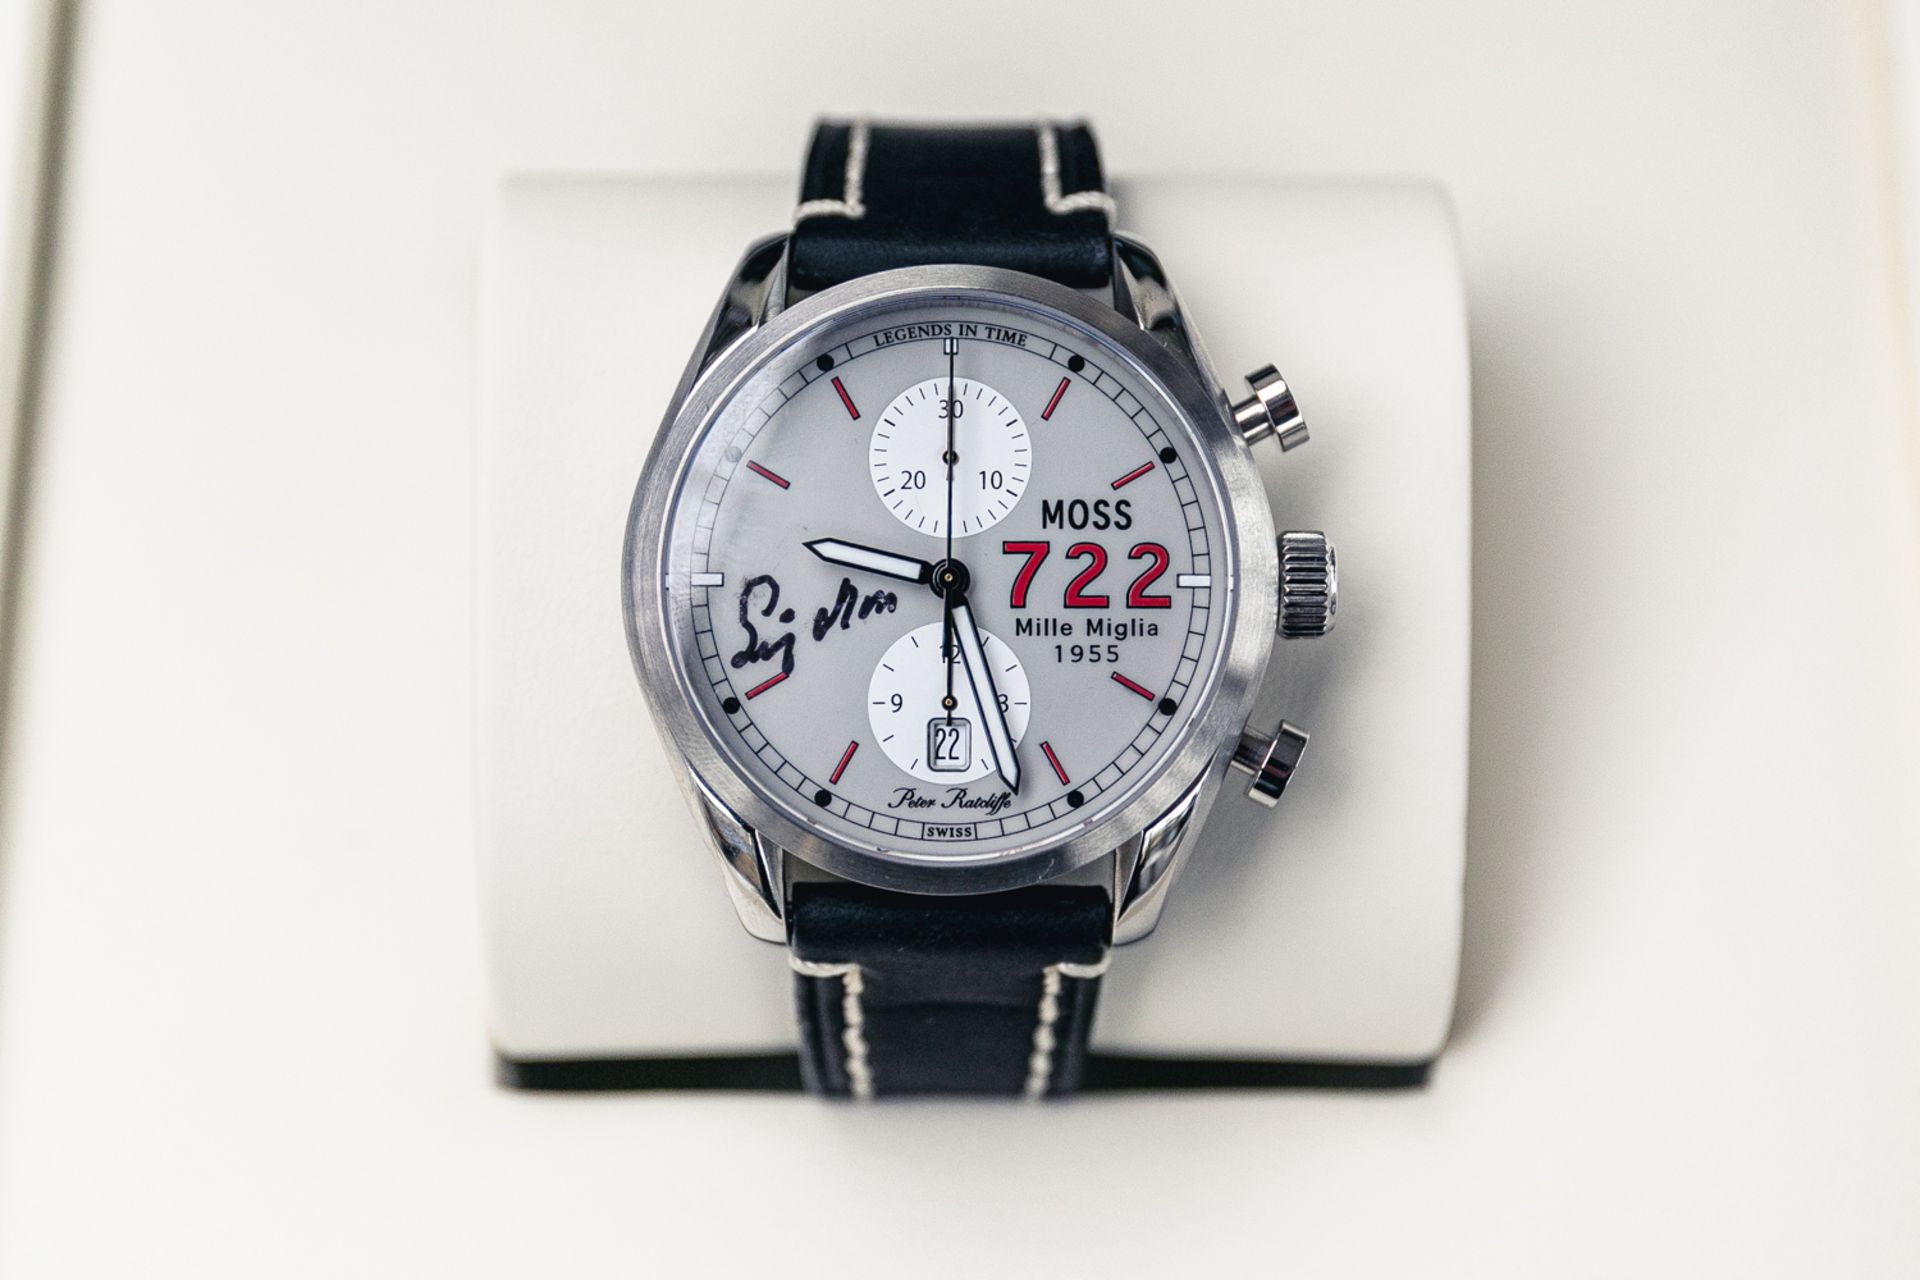 The Moss 722 chronograph celebrates the amazing Moss/Jenkinson Mille Miglia victory on May 1st 1955.